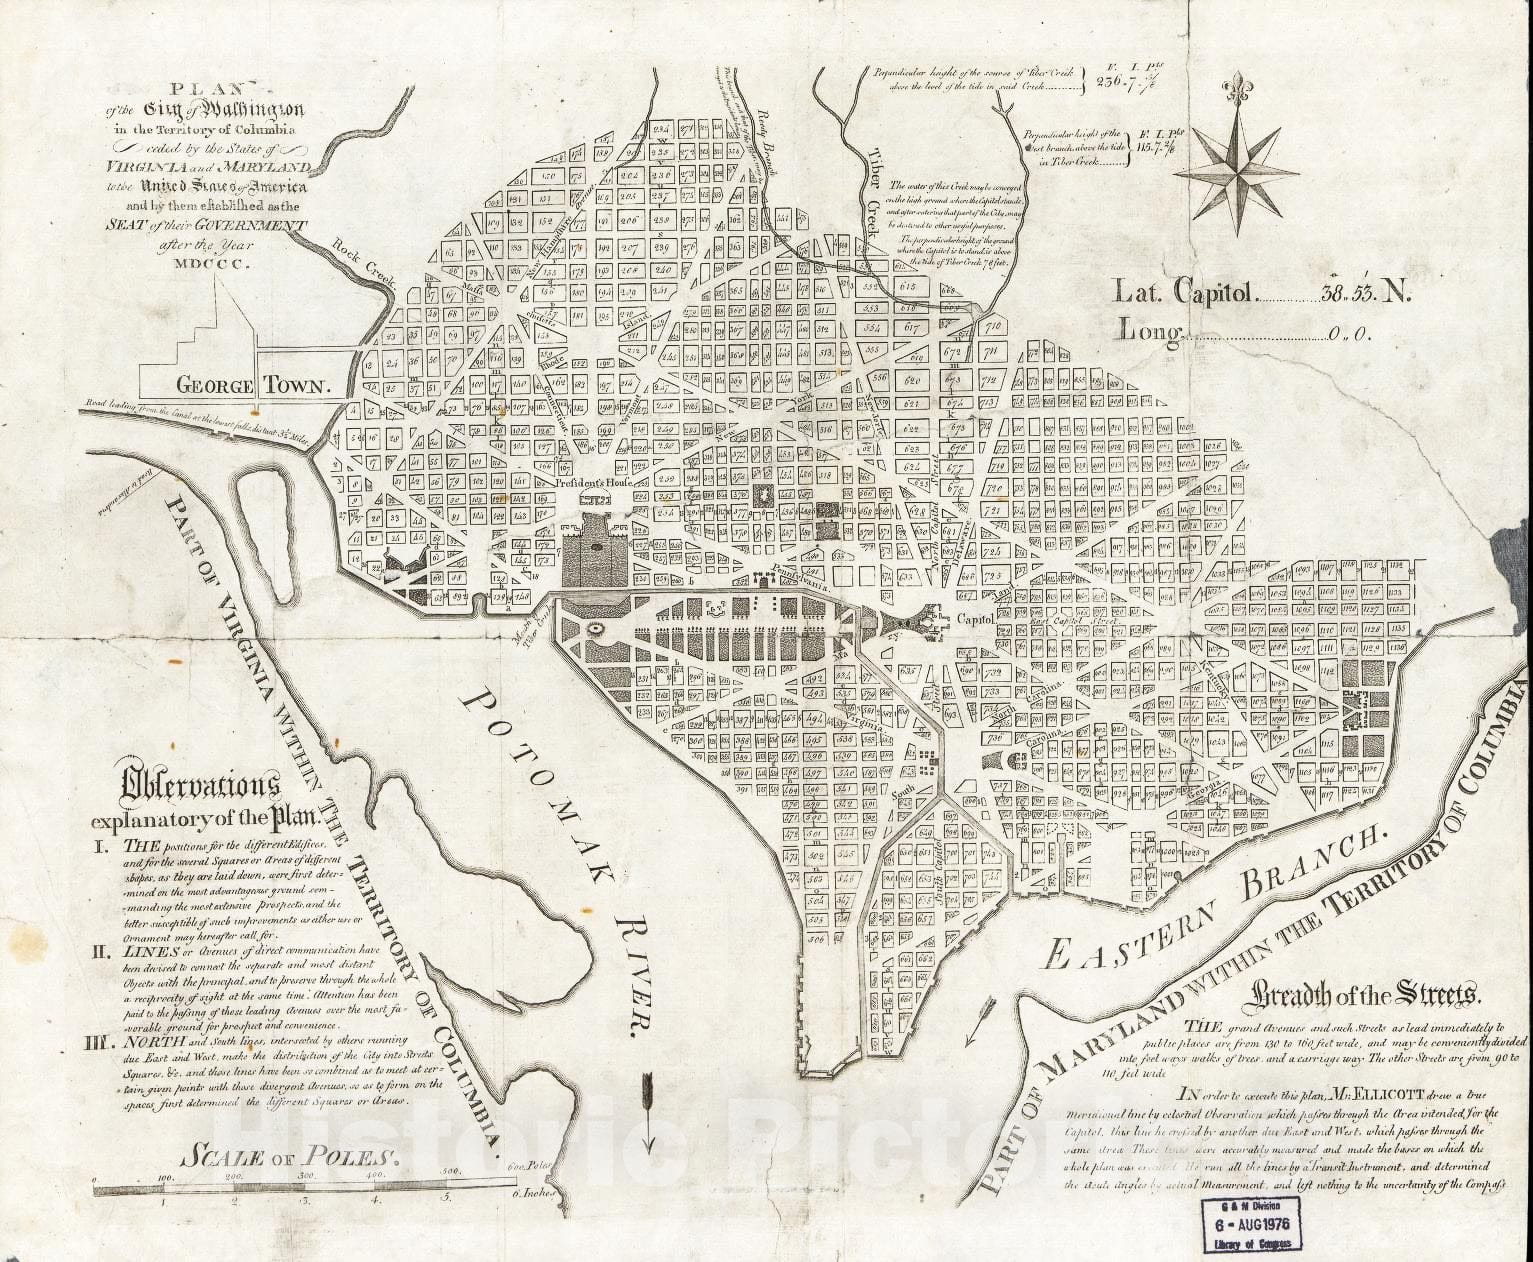 Historic 1794 Map - Plan of The City of Washington in The Territory of Columbia, ceded by The States of Virginia and Maryland to The United States of America